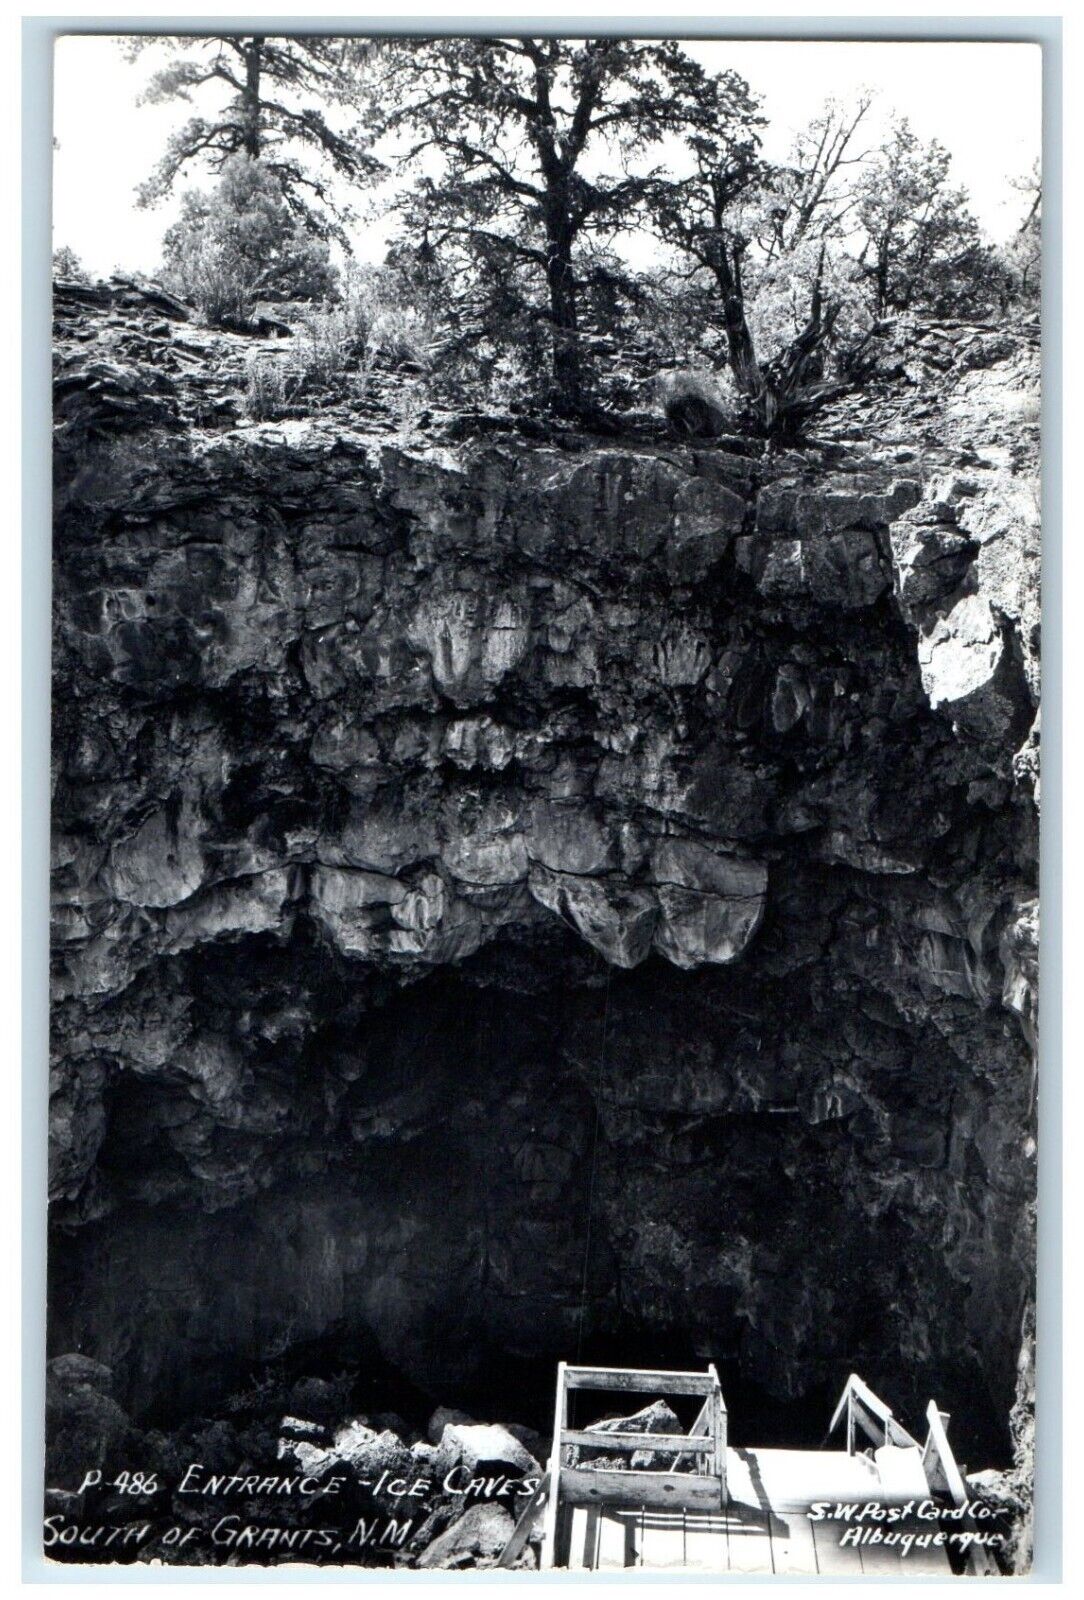 c1960 Entrance Ice Caves Exterior South Grants New Mexico NM RPPC Photo Postcard